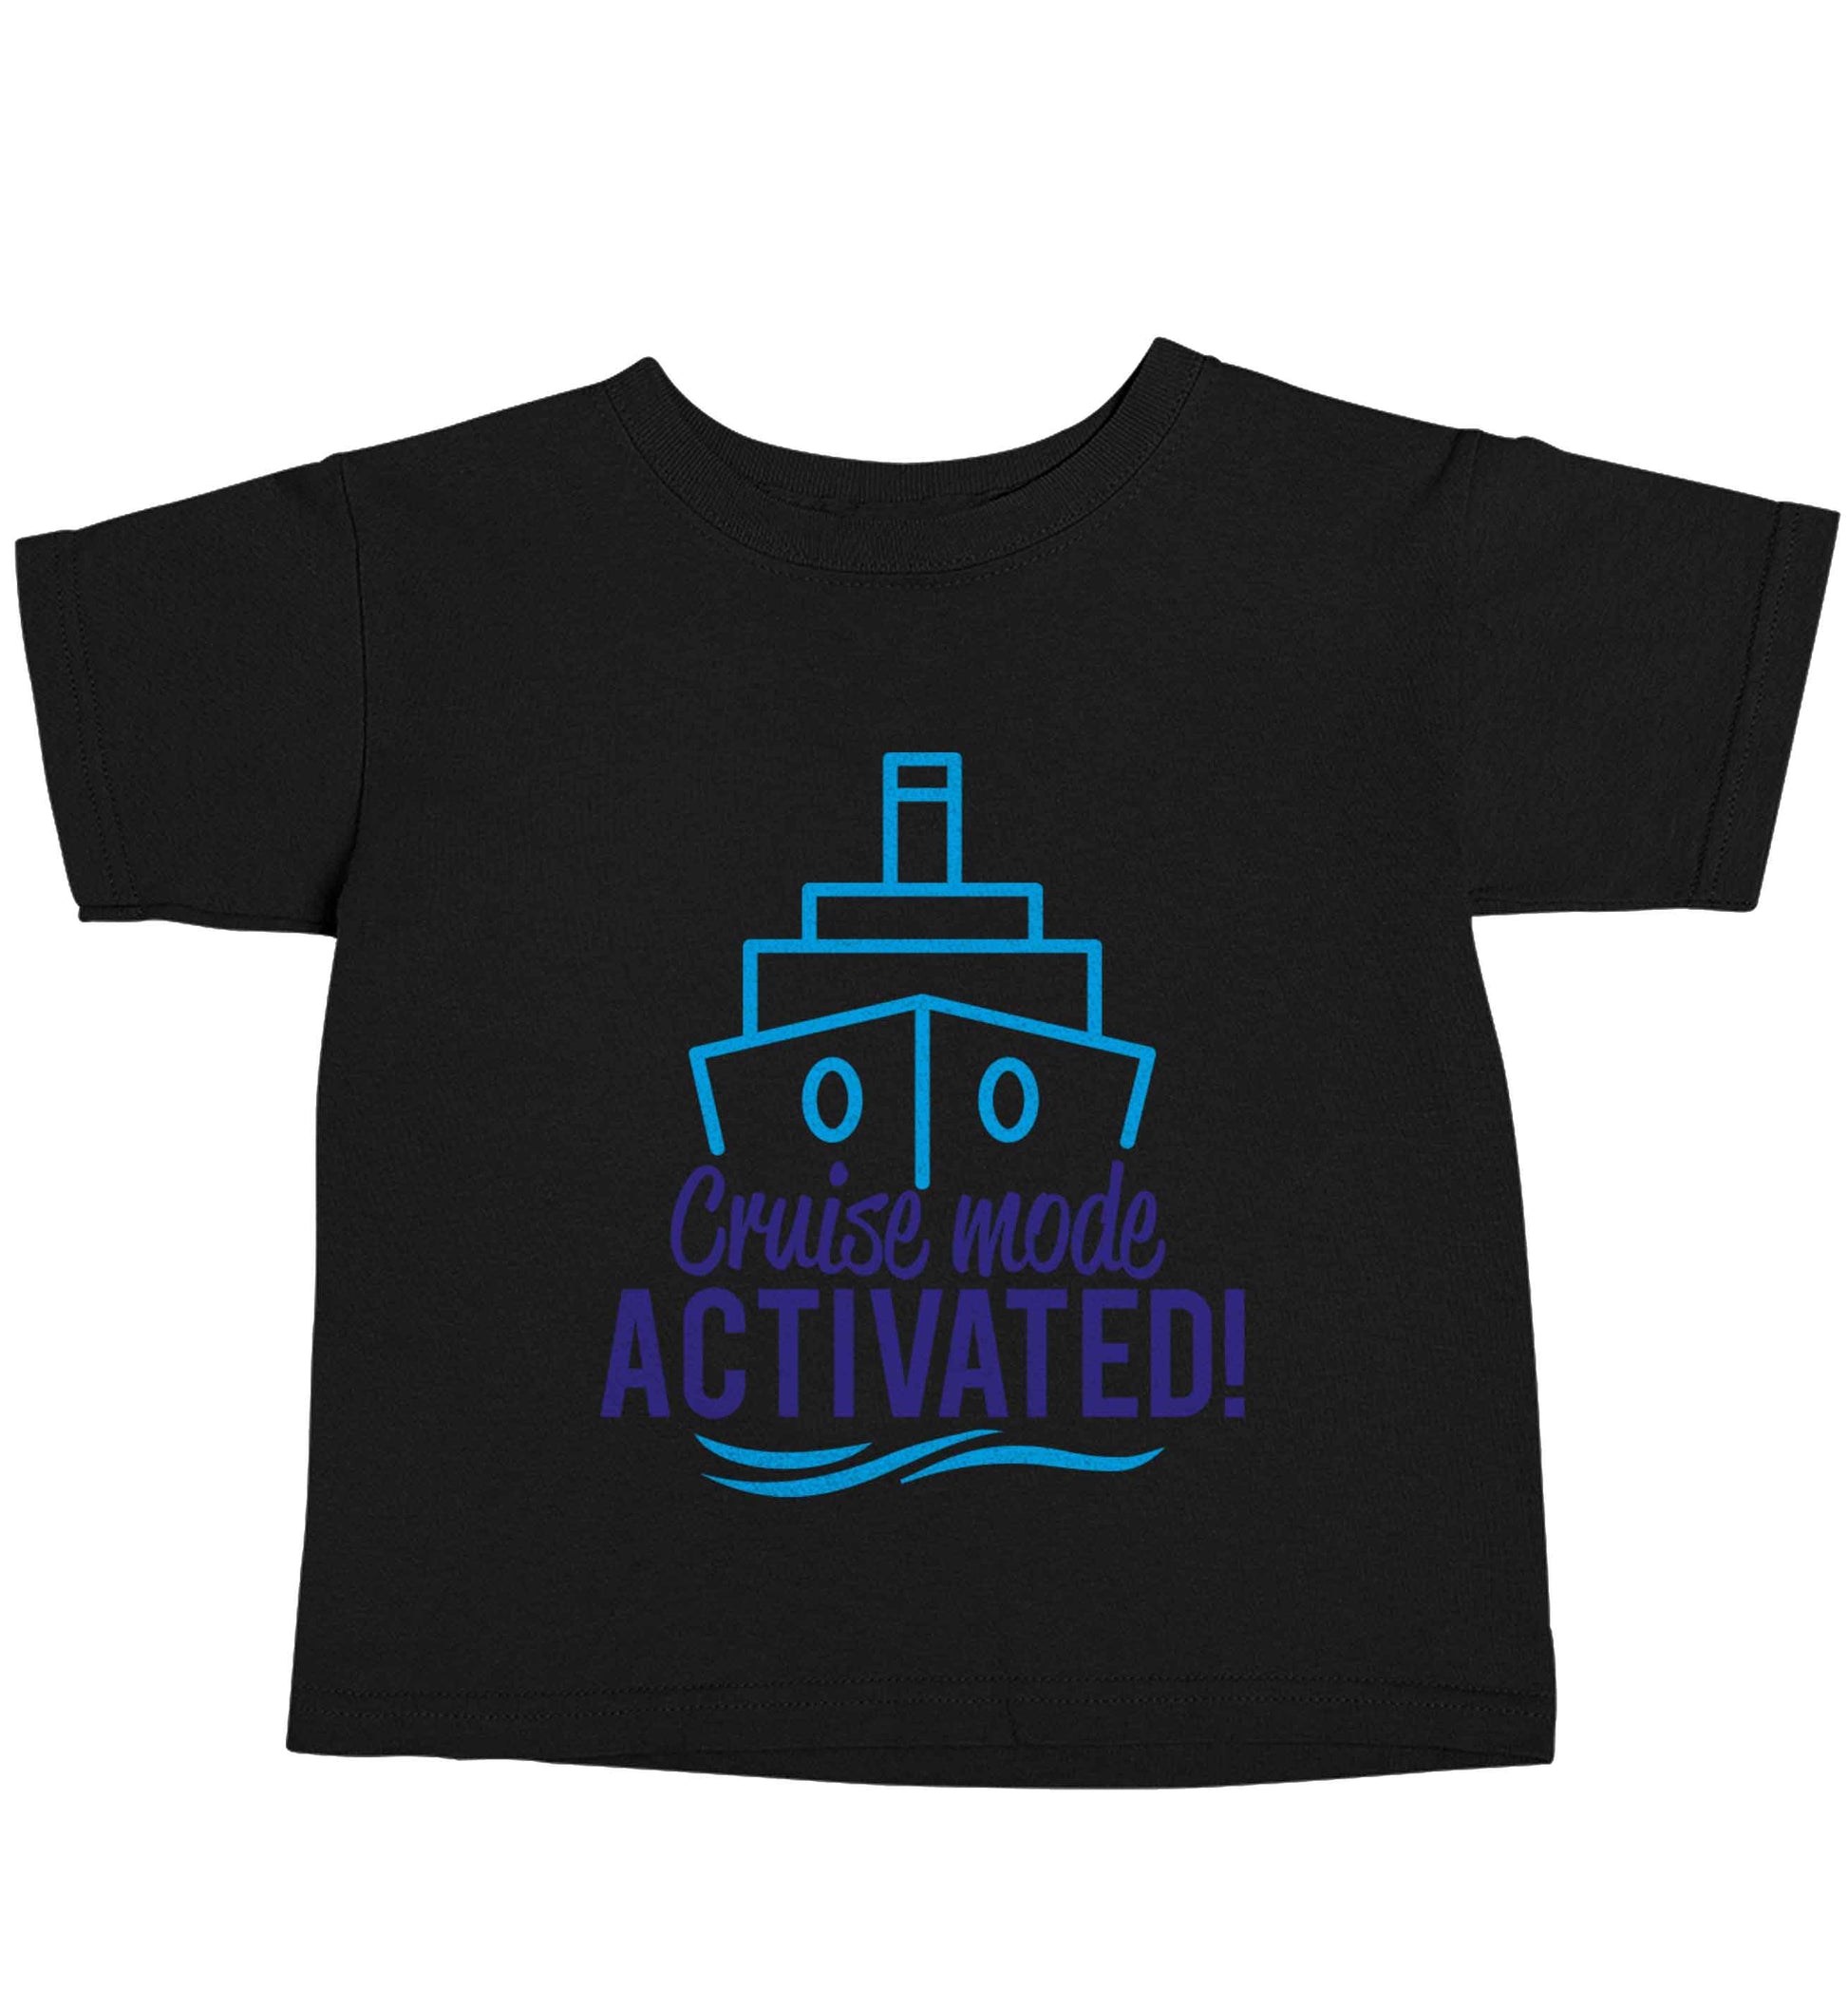 Cruise mode activated Black baby toddler Tshirt 2 years